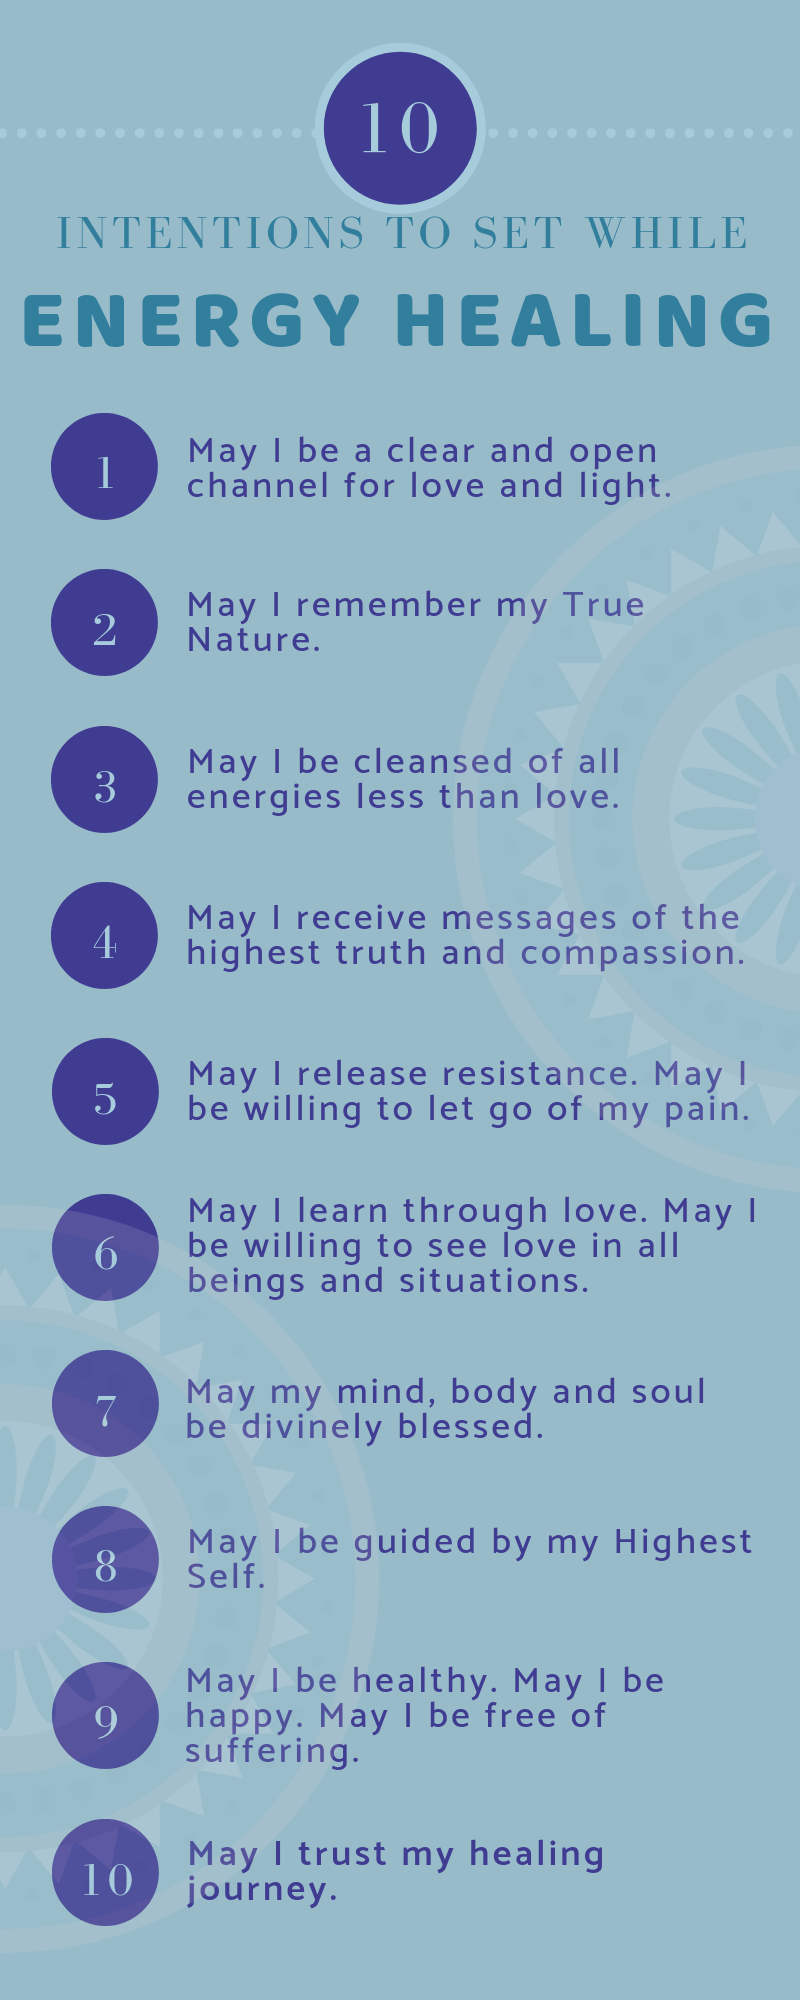 10 Intentions to Set while Energy Healing